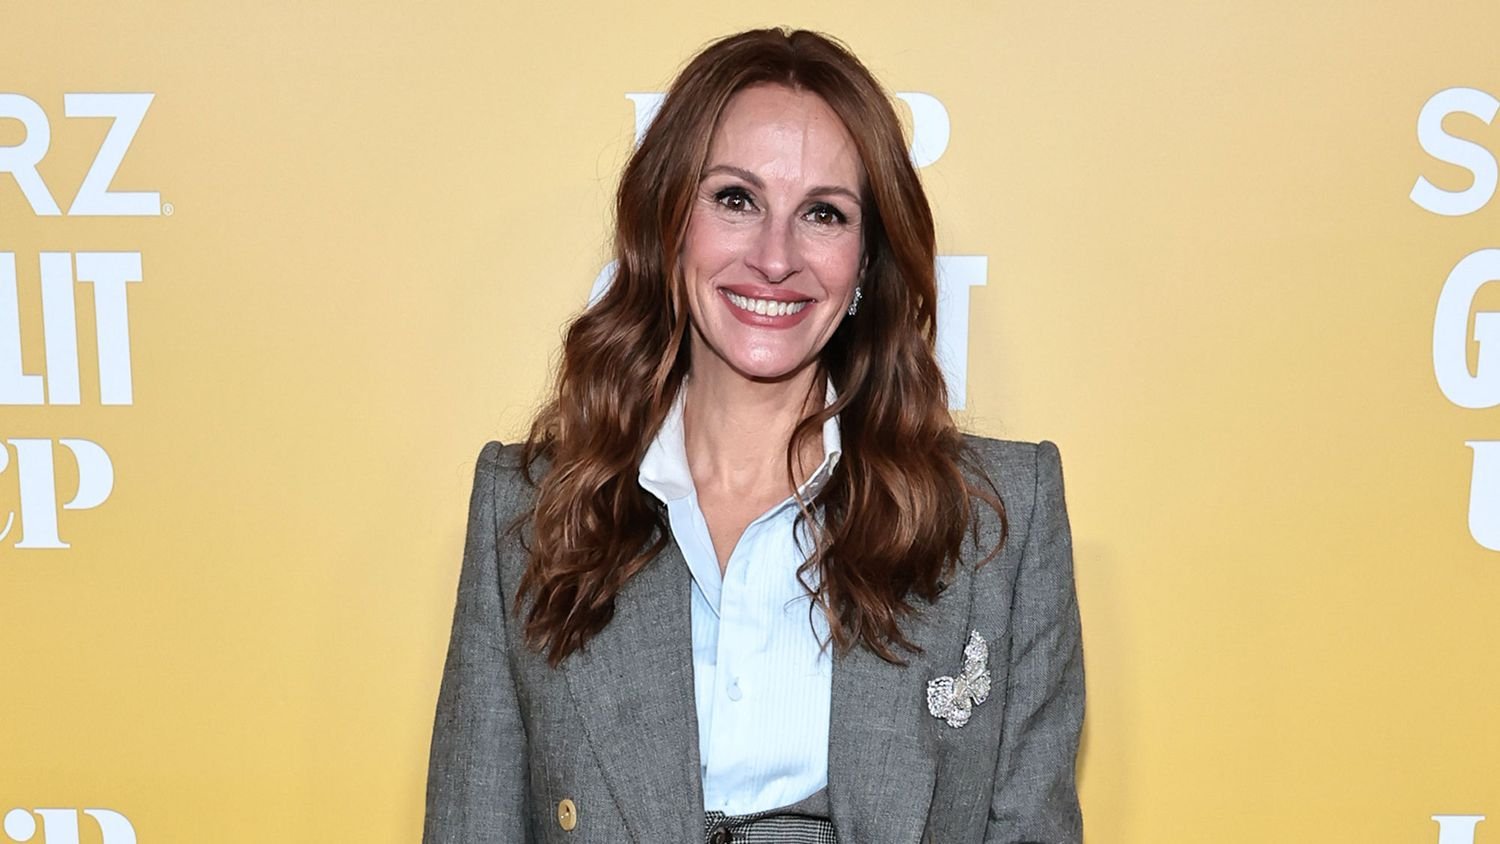 Julia Roberts Had a Rare Designer Fashion Moment While Wearing a Celeb-Loved Spring Trend